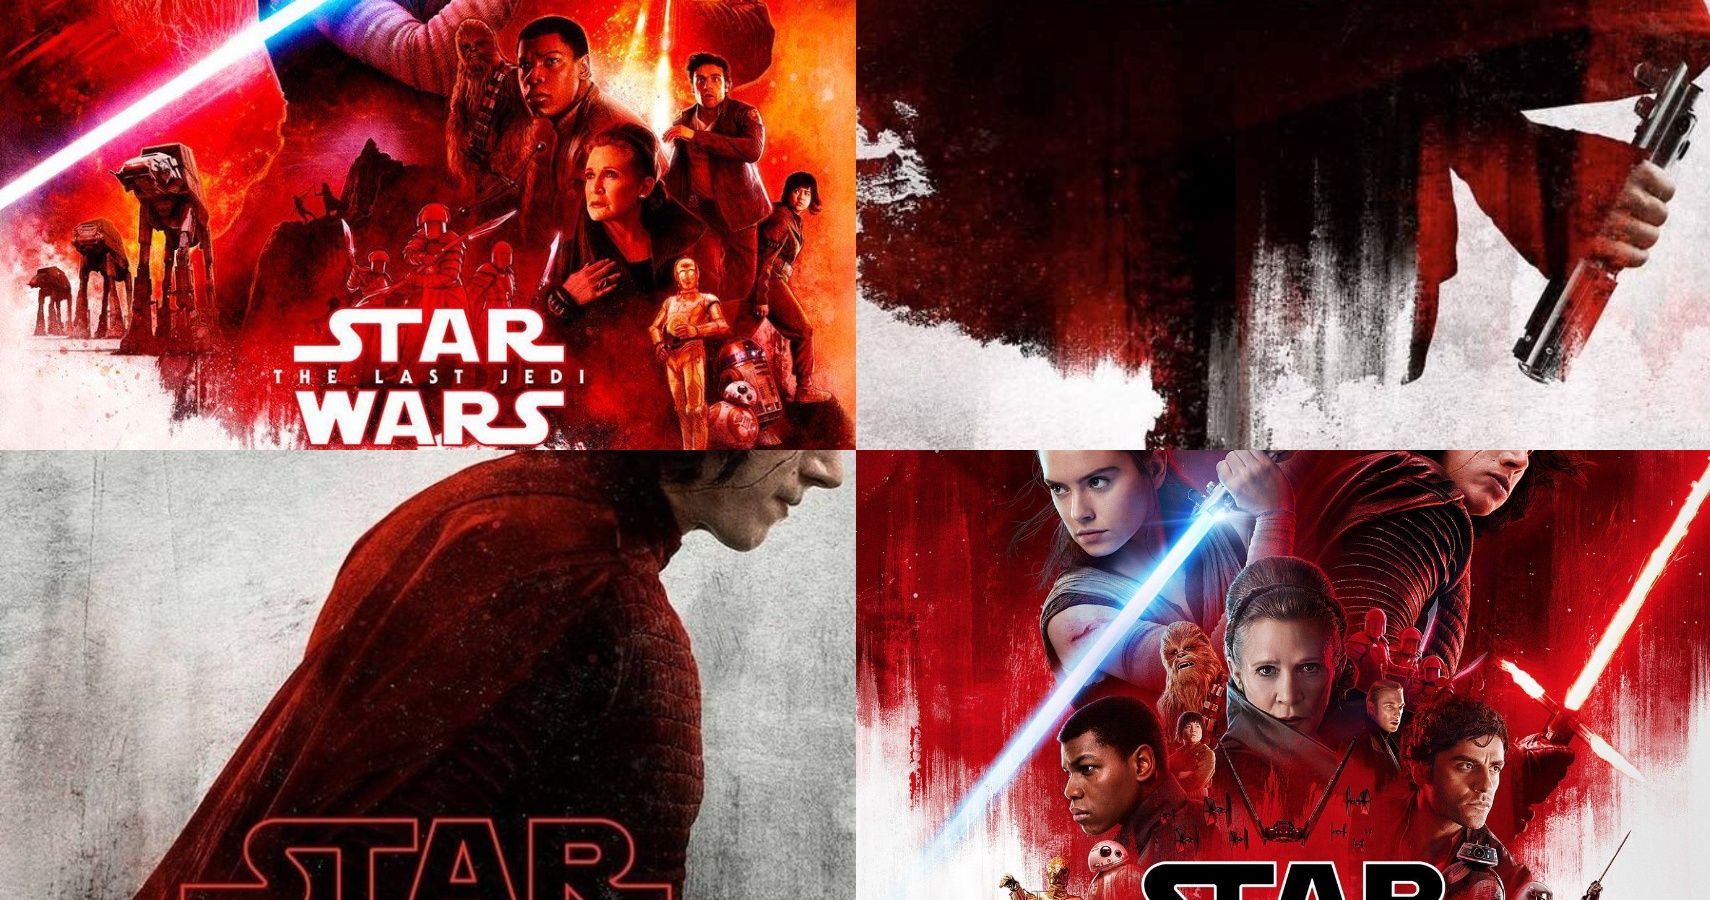 New Character Posters Released For Star Wars: The Last Jedi